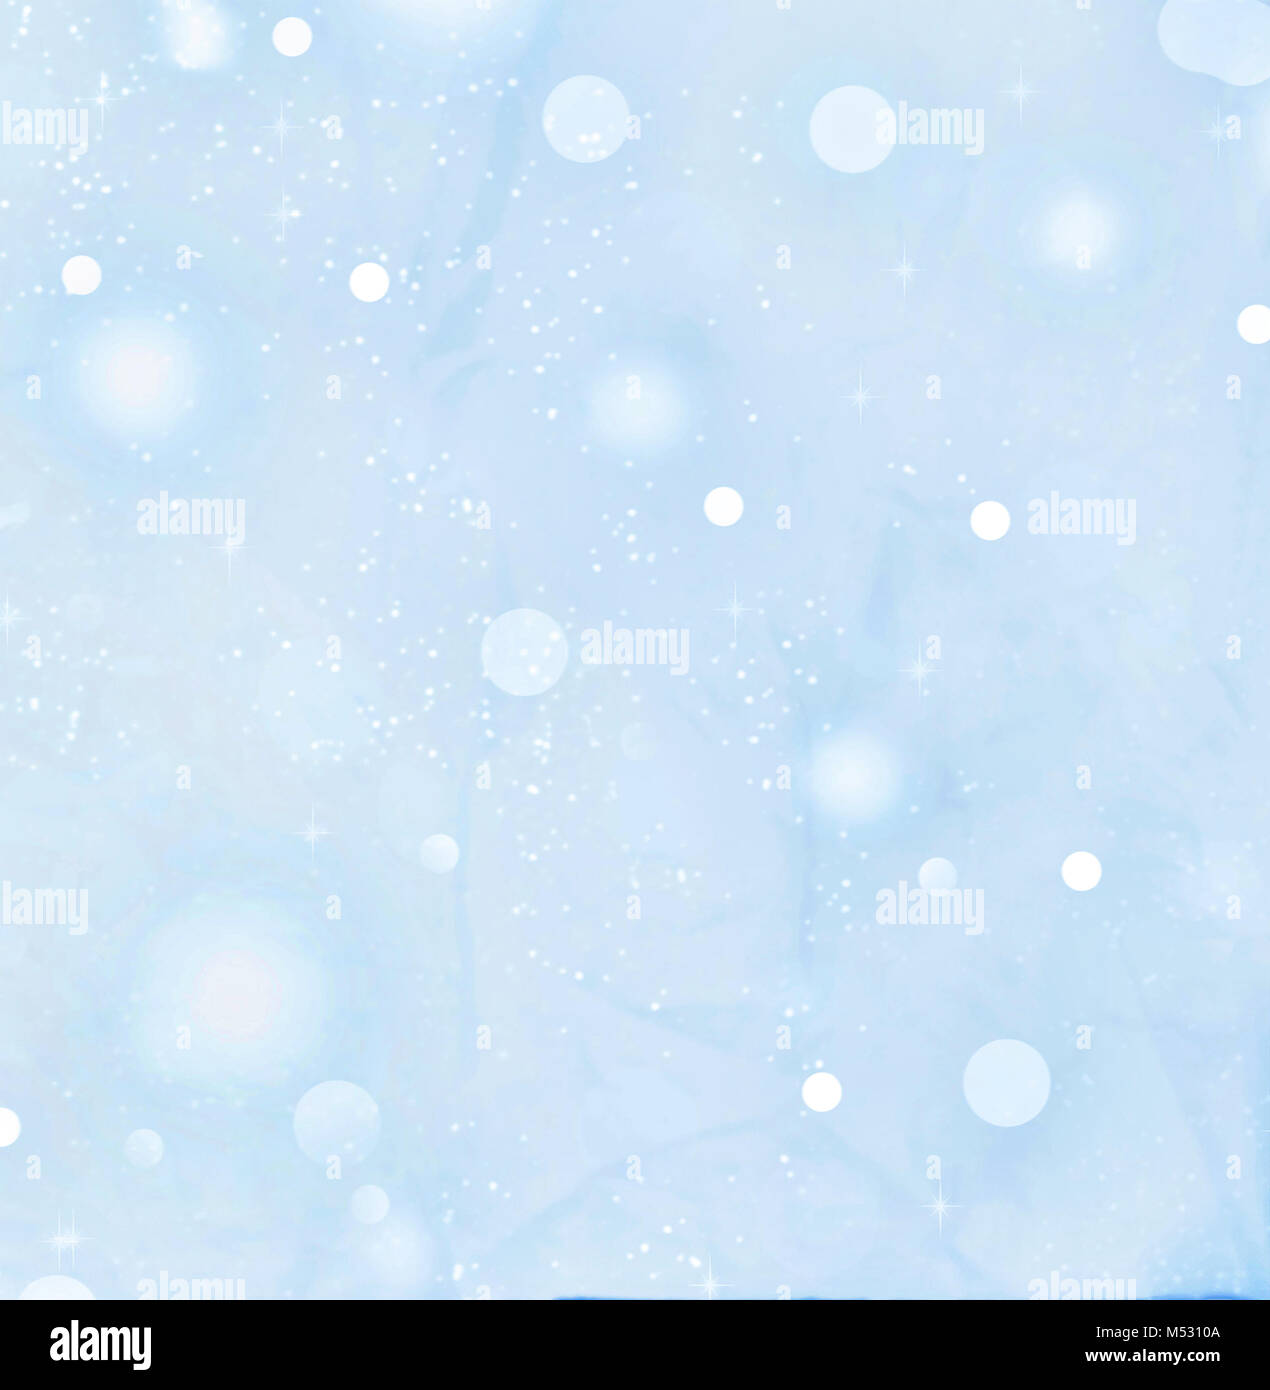 New Year Christmas Soft Blue Background With Falling Snow Stock